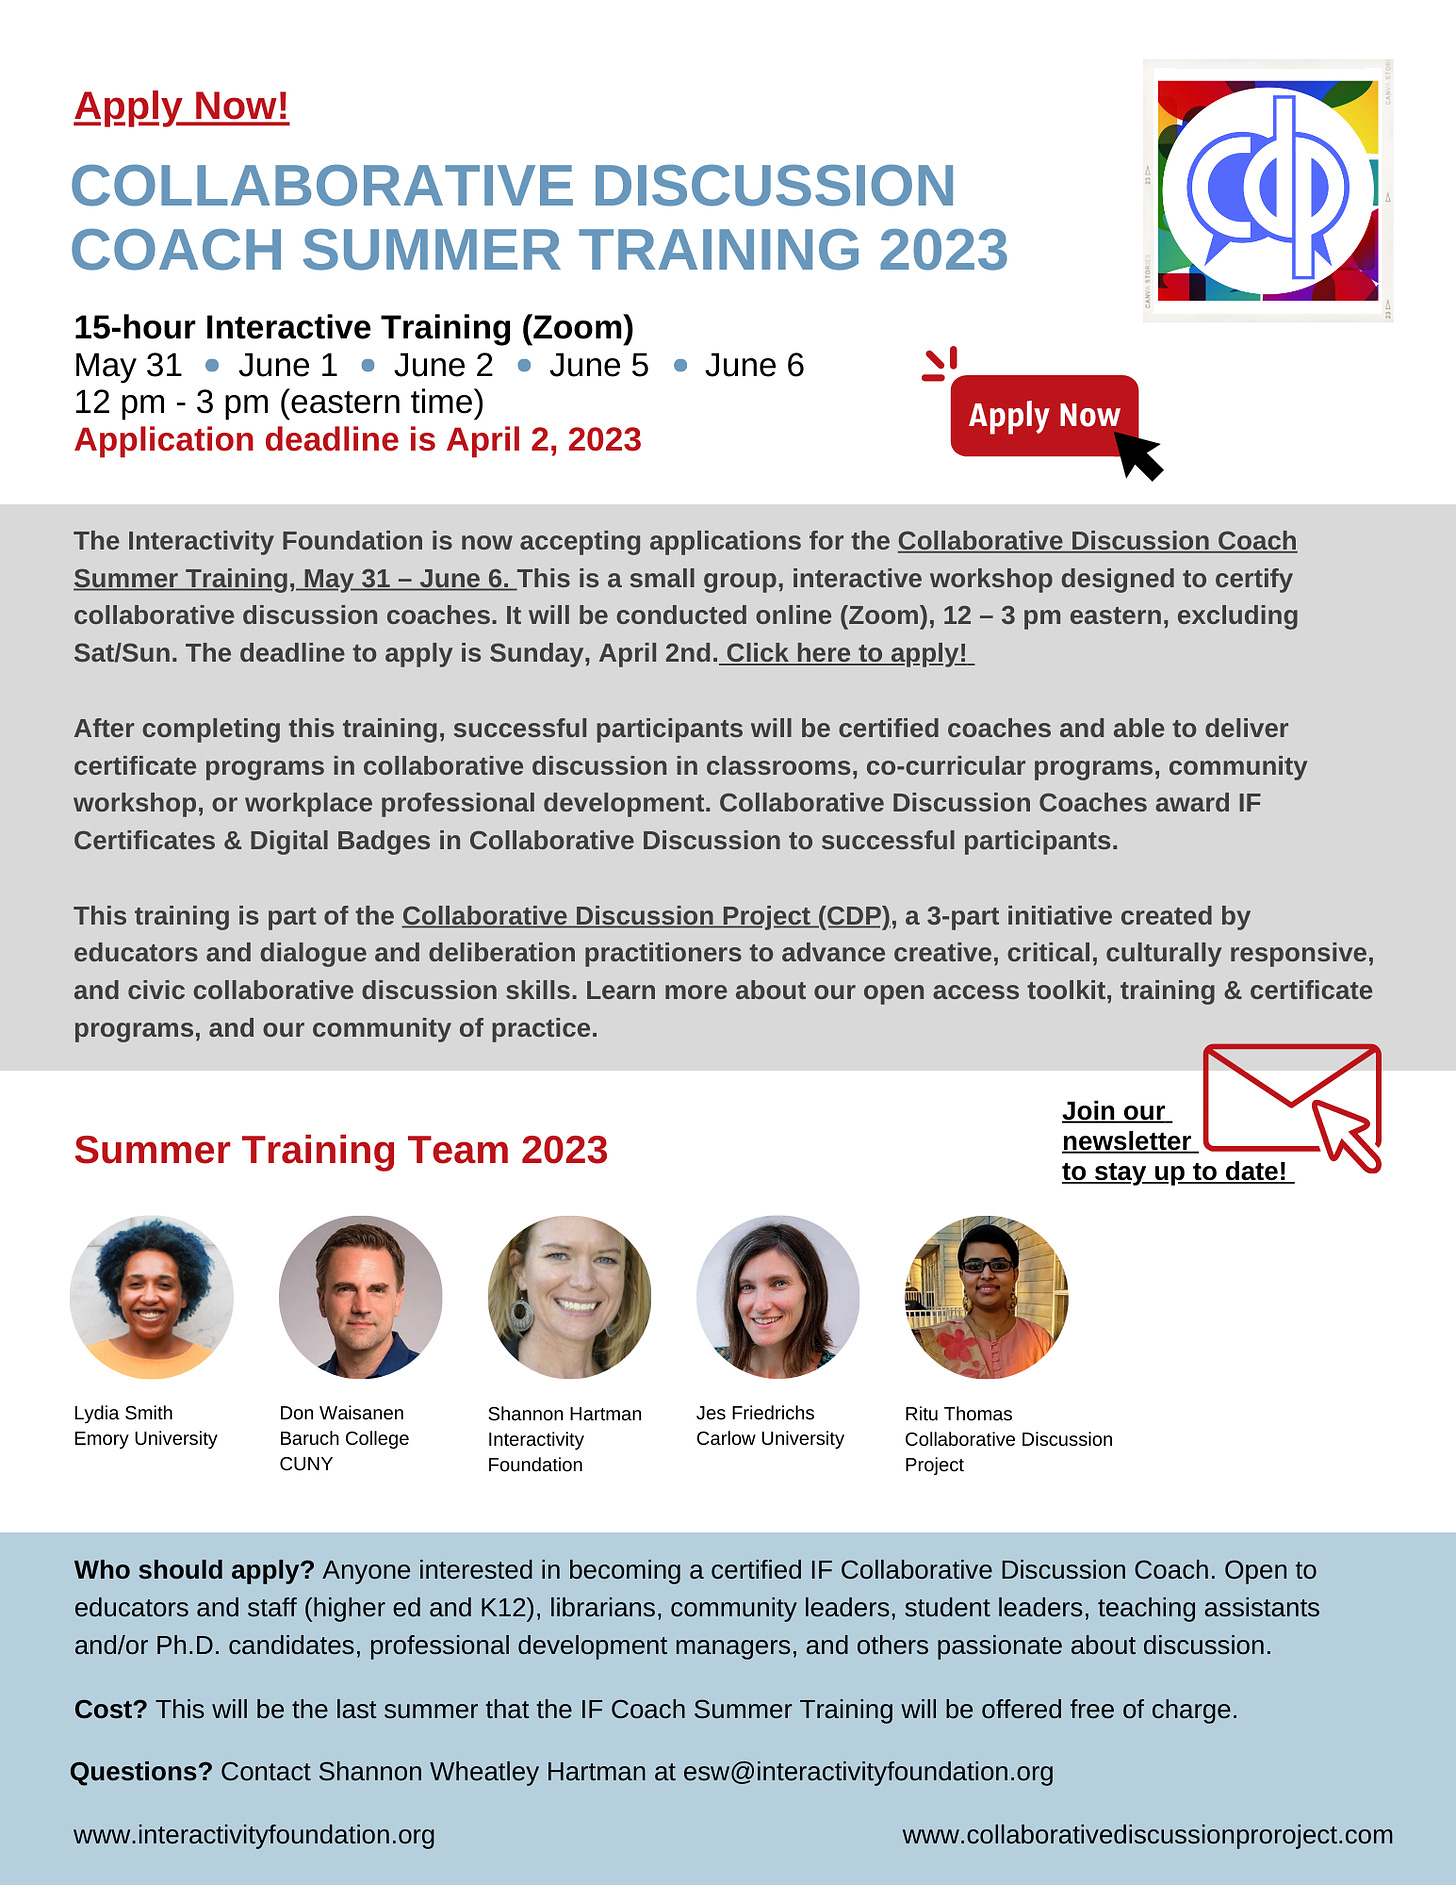 Collaborative Discussion Coach Summer Training 2023 Flyer